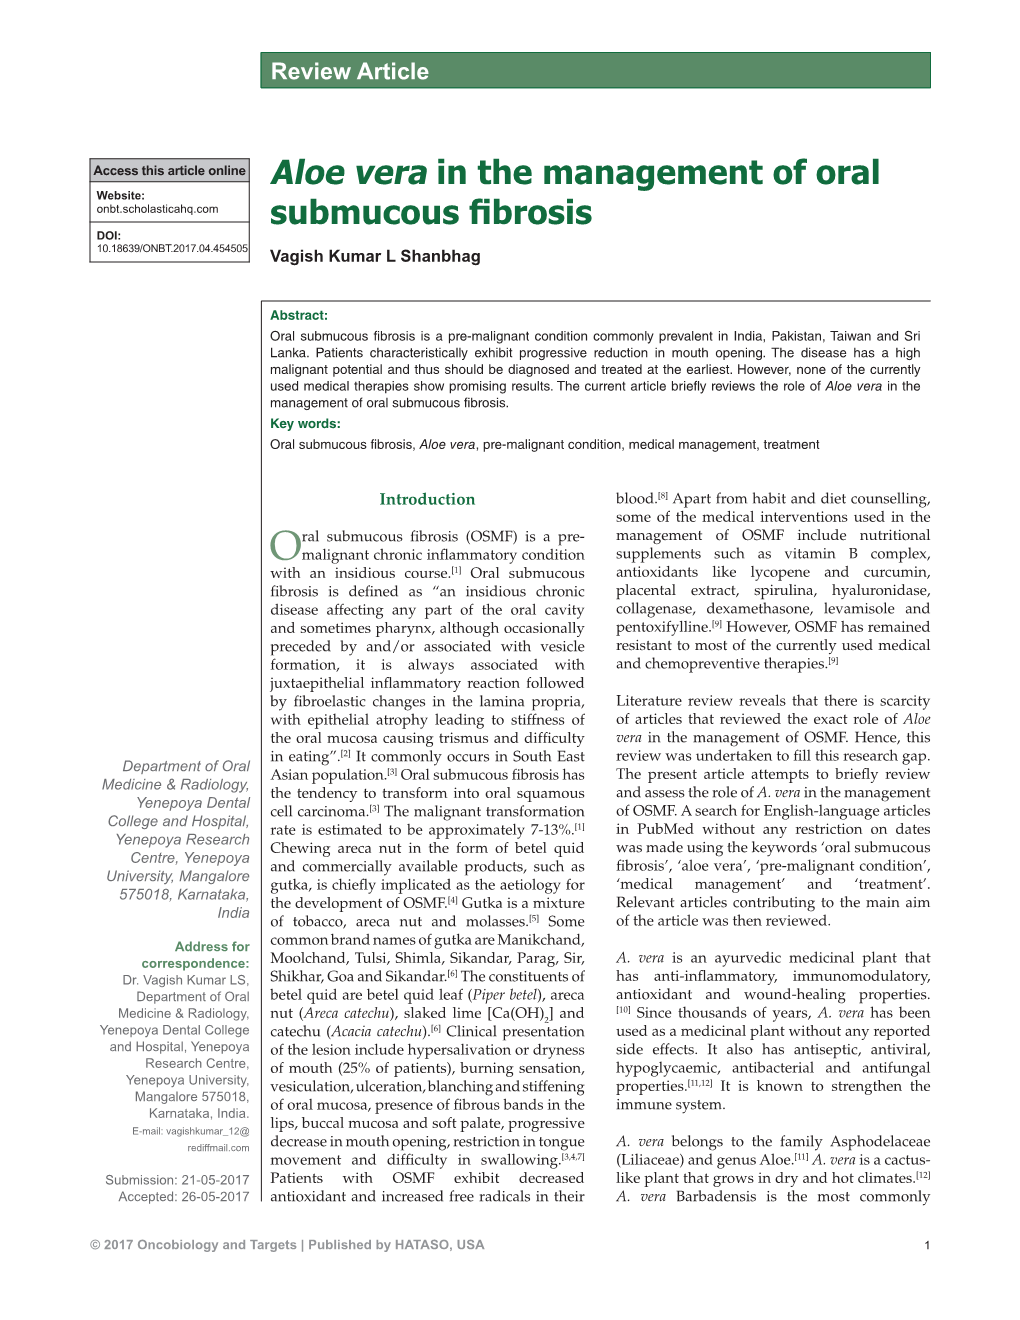 Aloe Vera in the Management of Oral Submucous Fibrosis